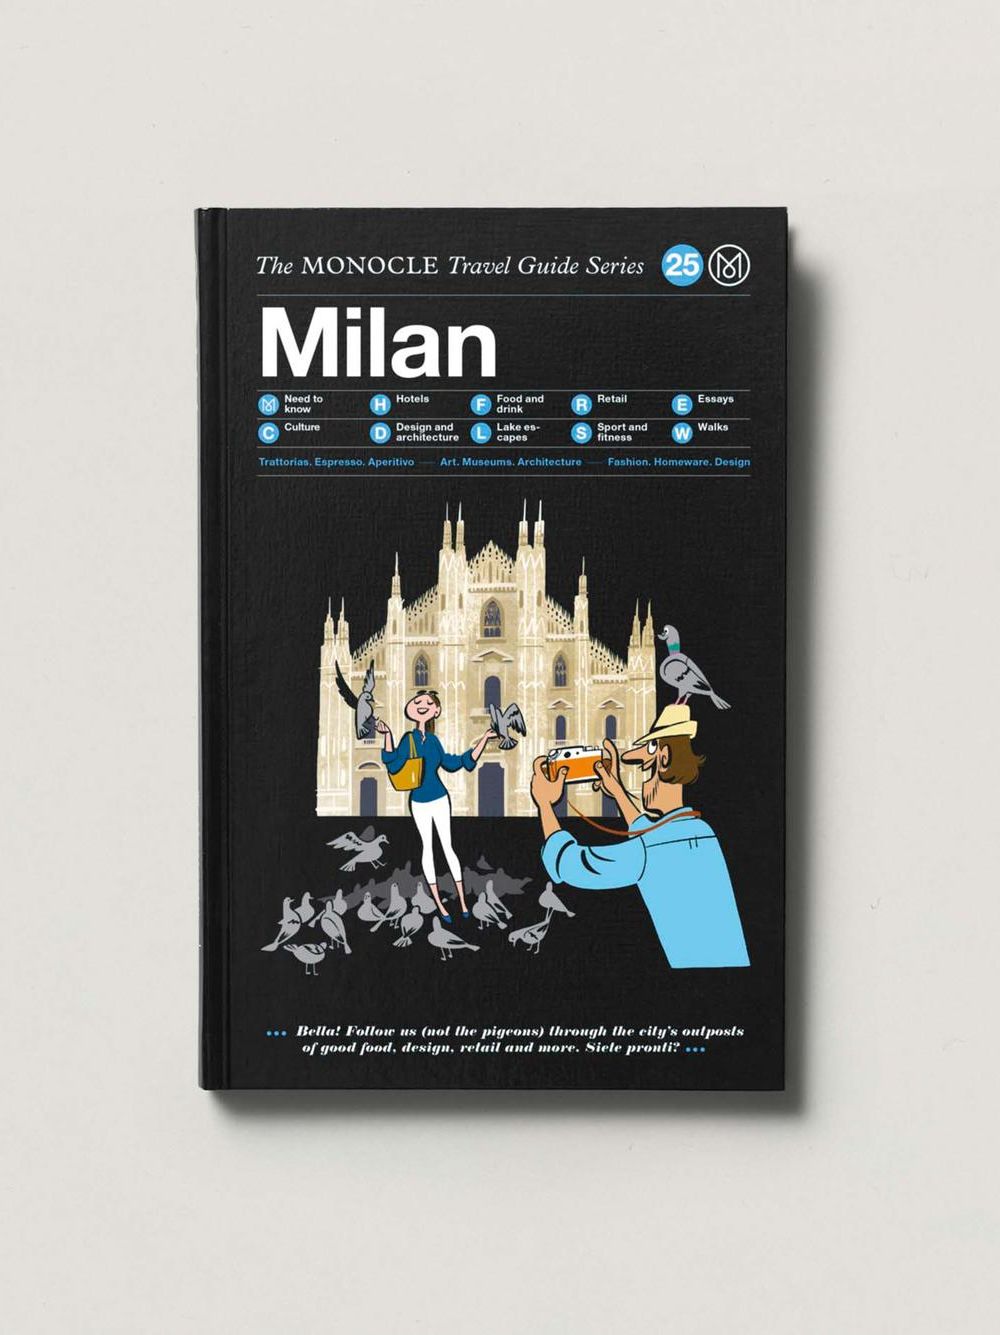 The Monocle Travel Guide, Milan